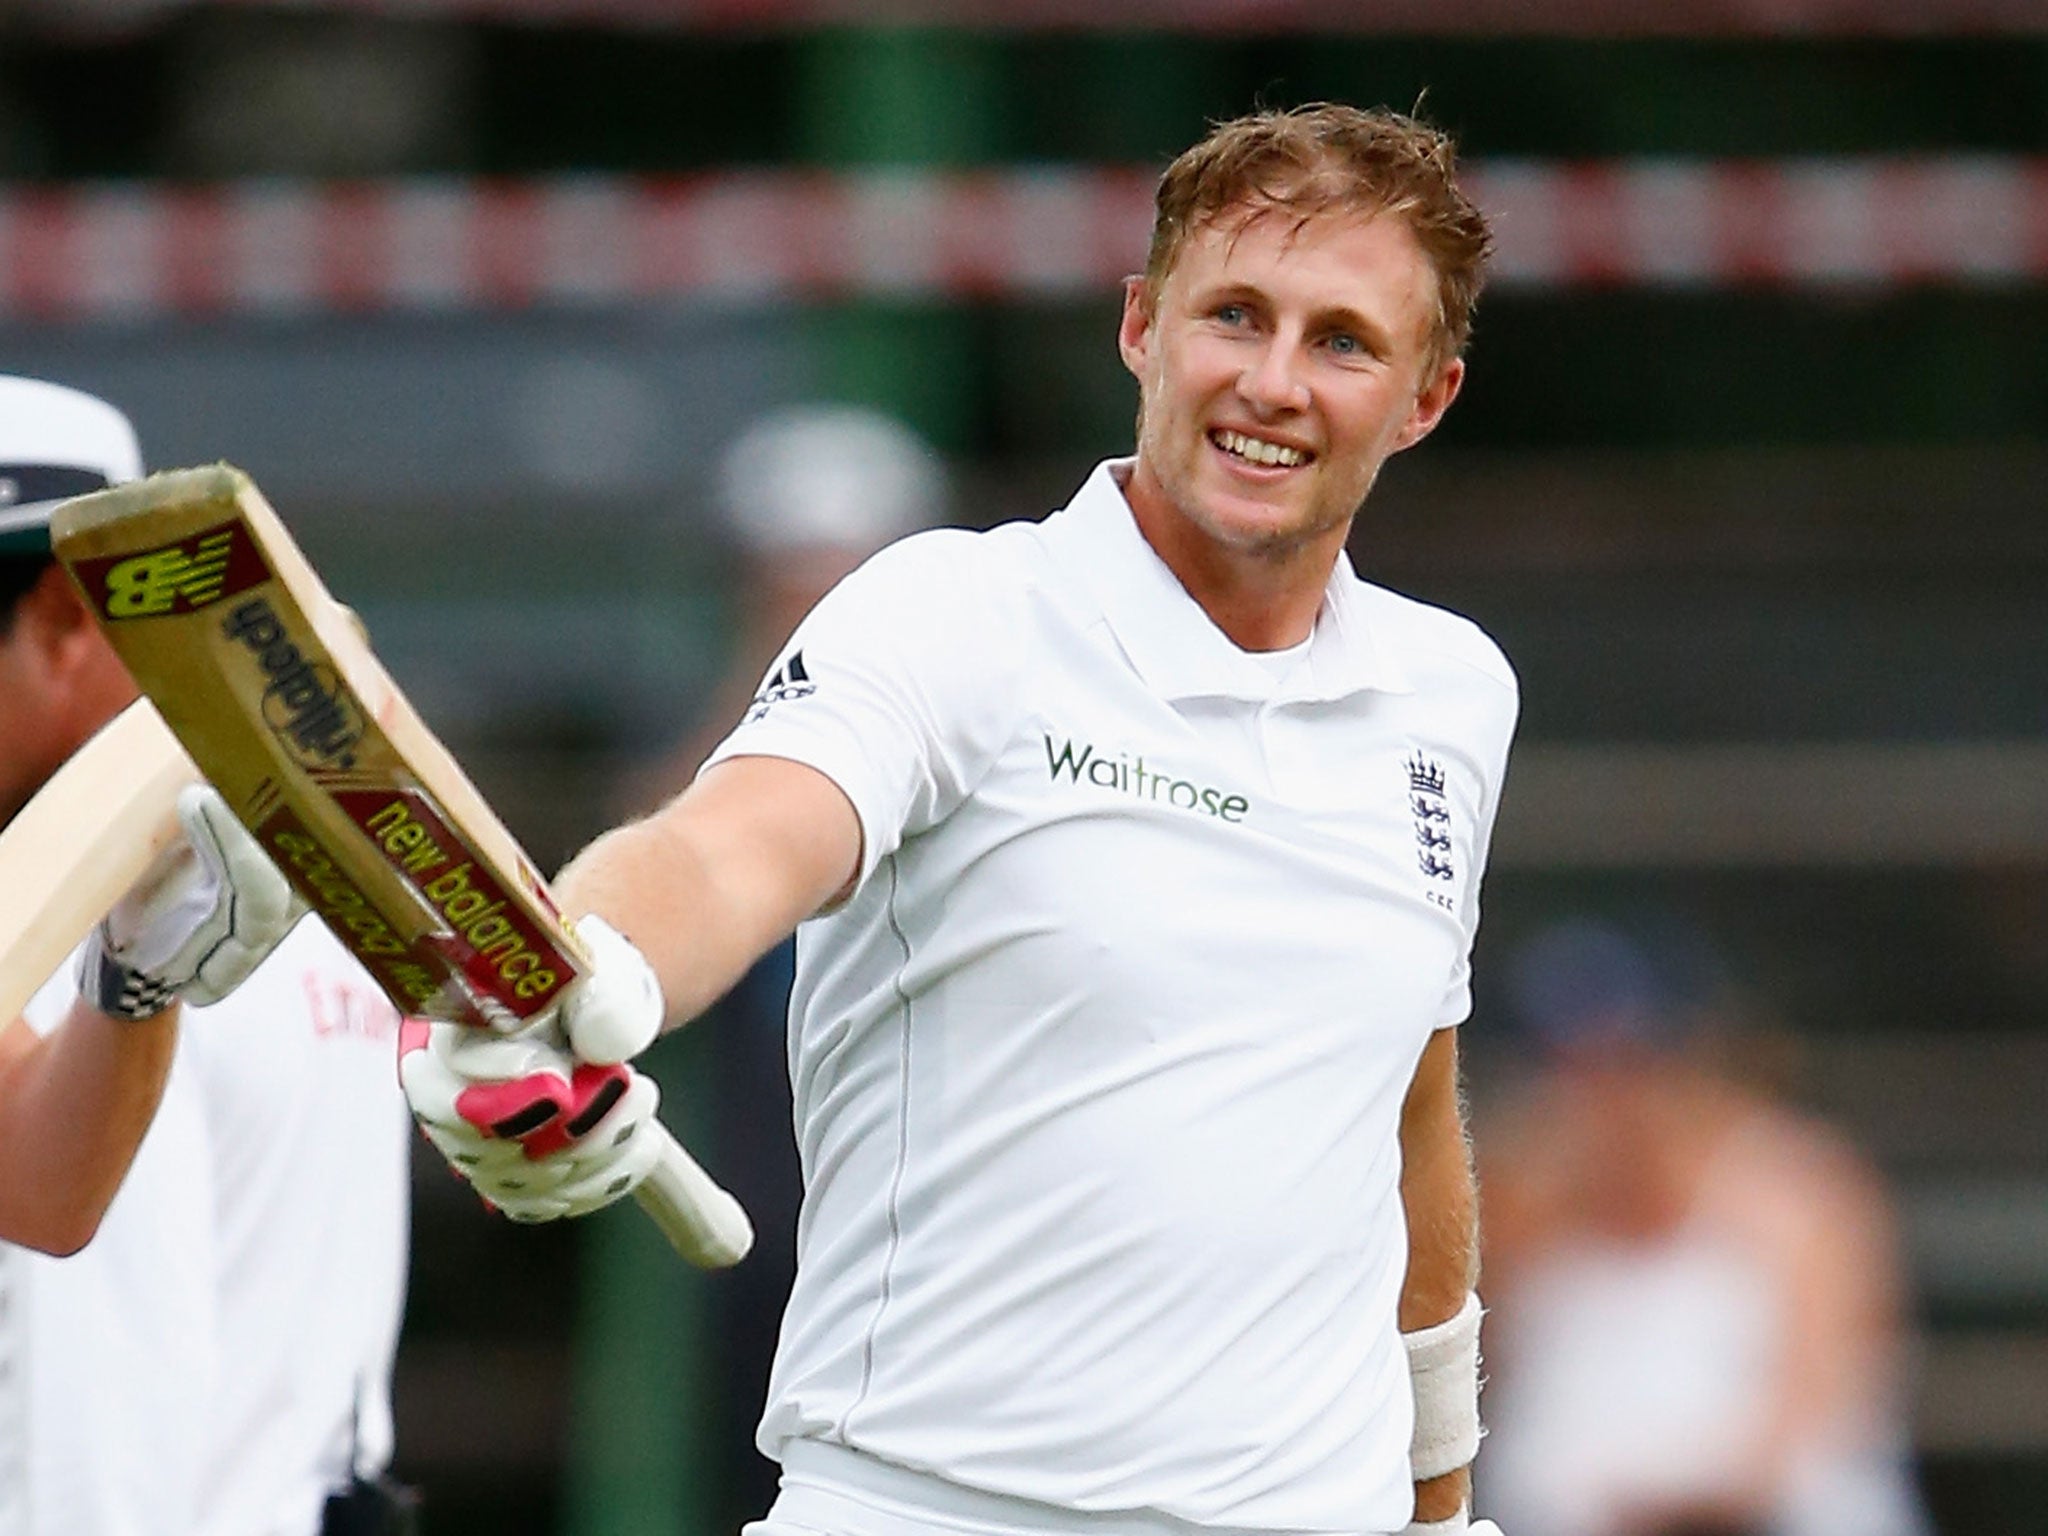 England’s centurion at the Wanderers Joe Root moves up to No 2 in the ICC batting rankings